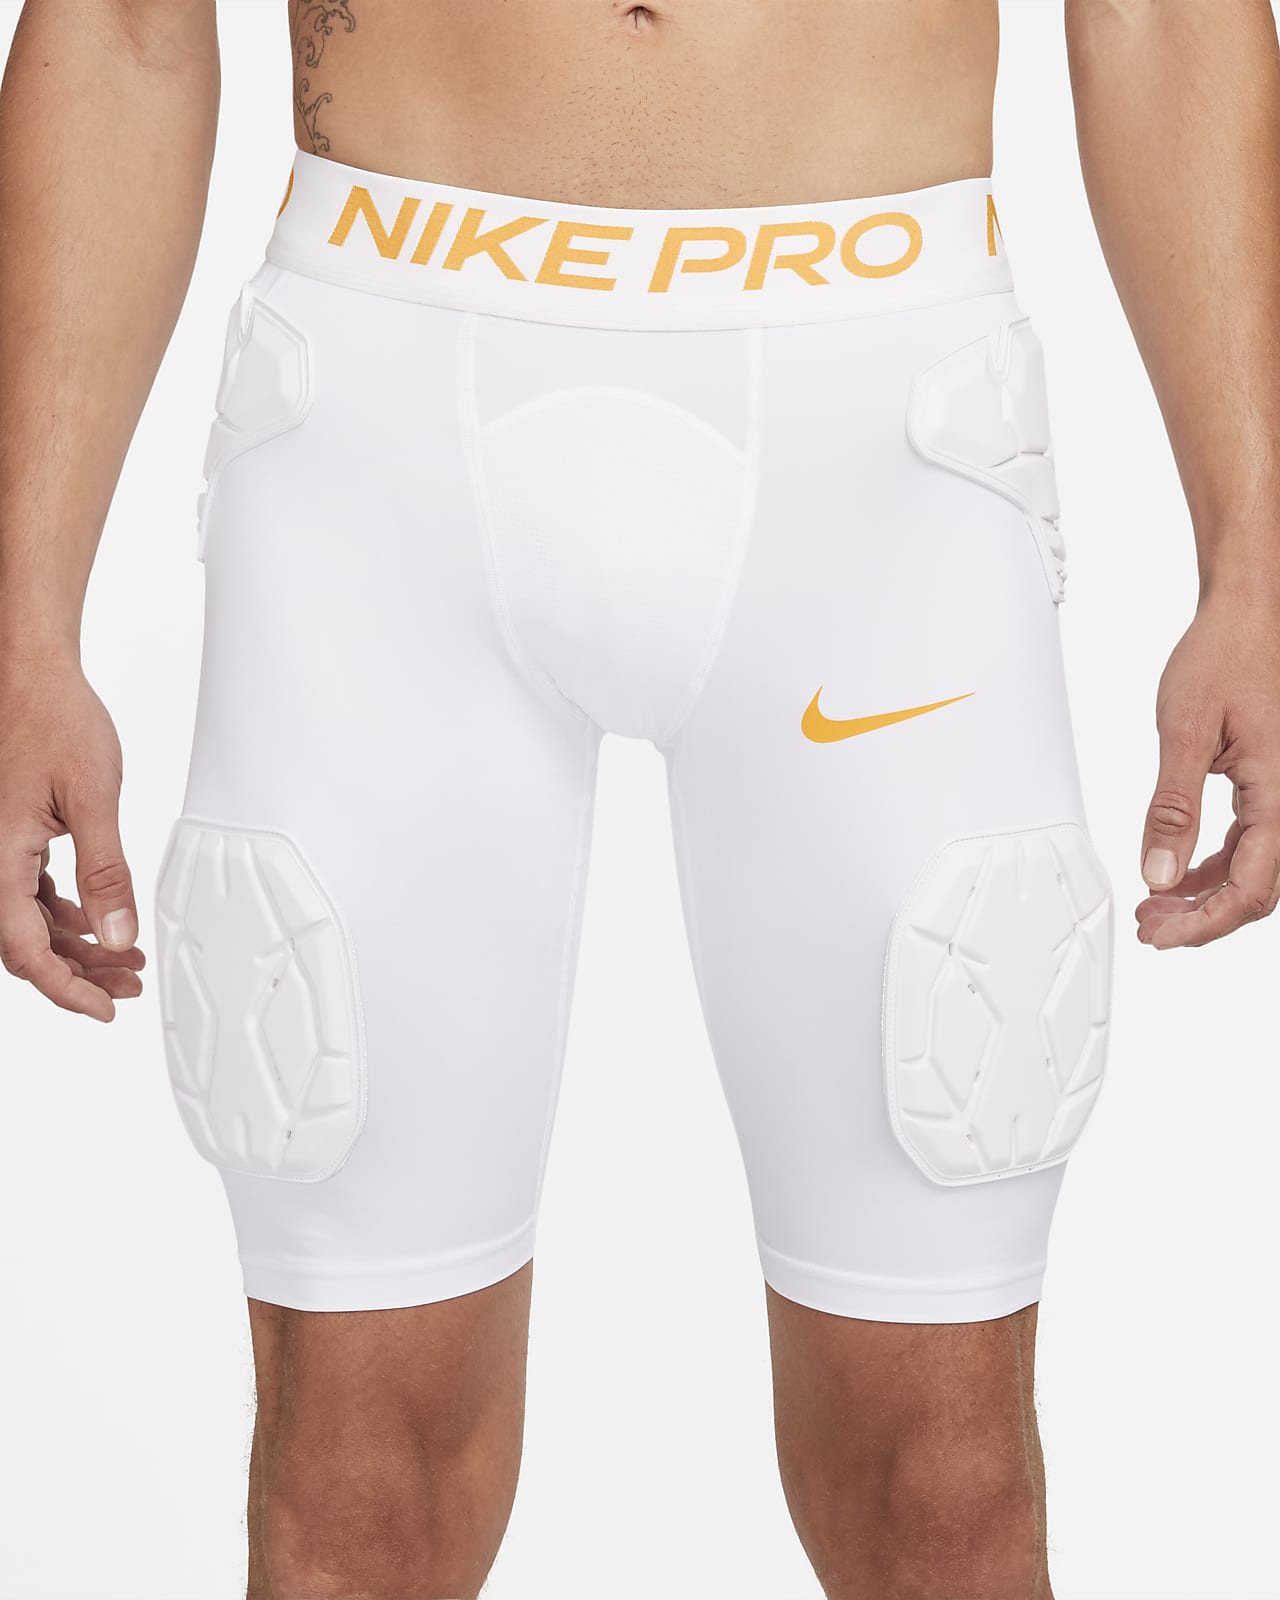 NIKE Pro Hyperstrong White Grey Padded Basketball Compression Shorts Mens L  4XL